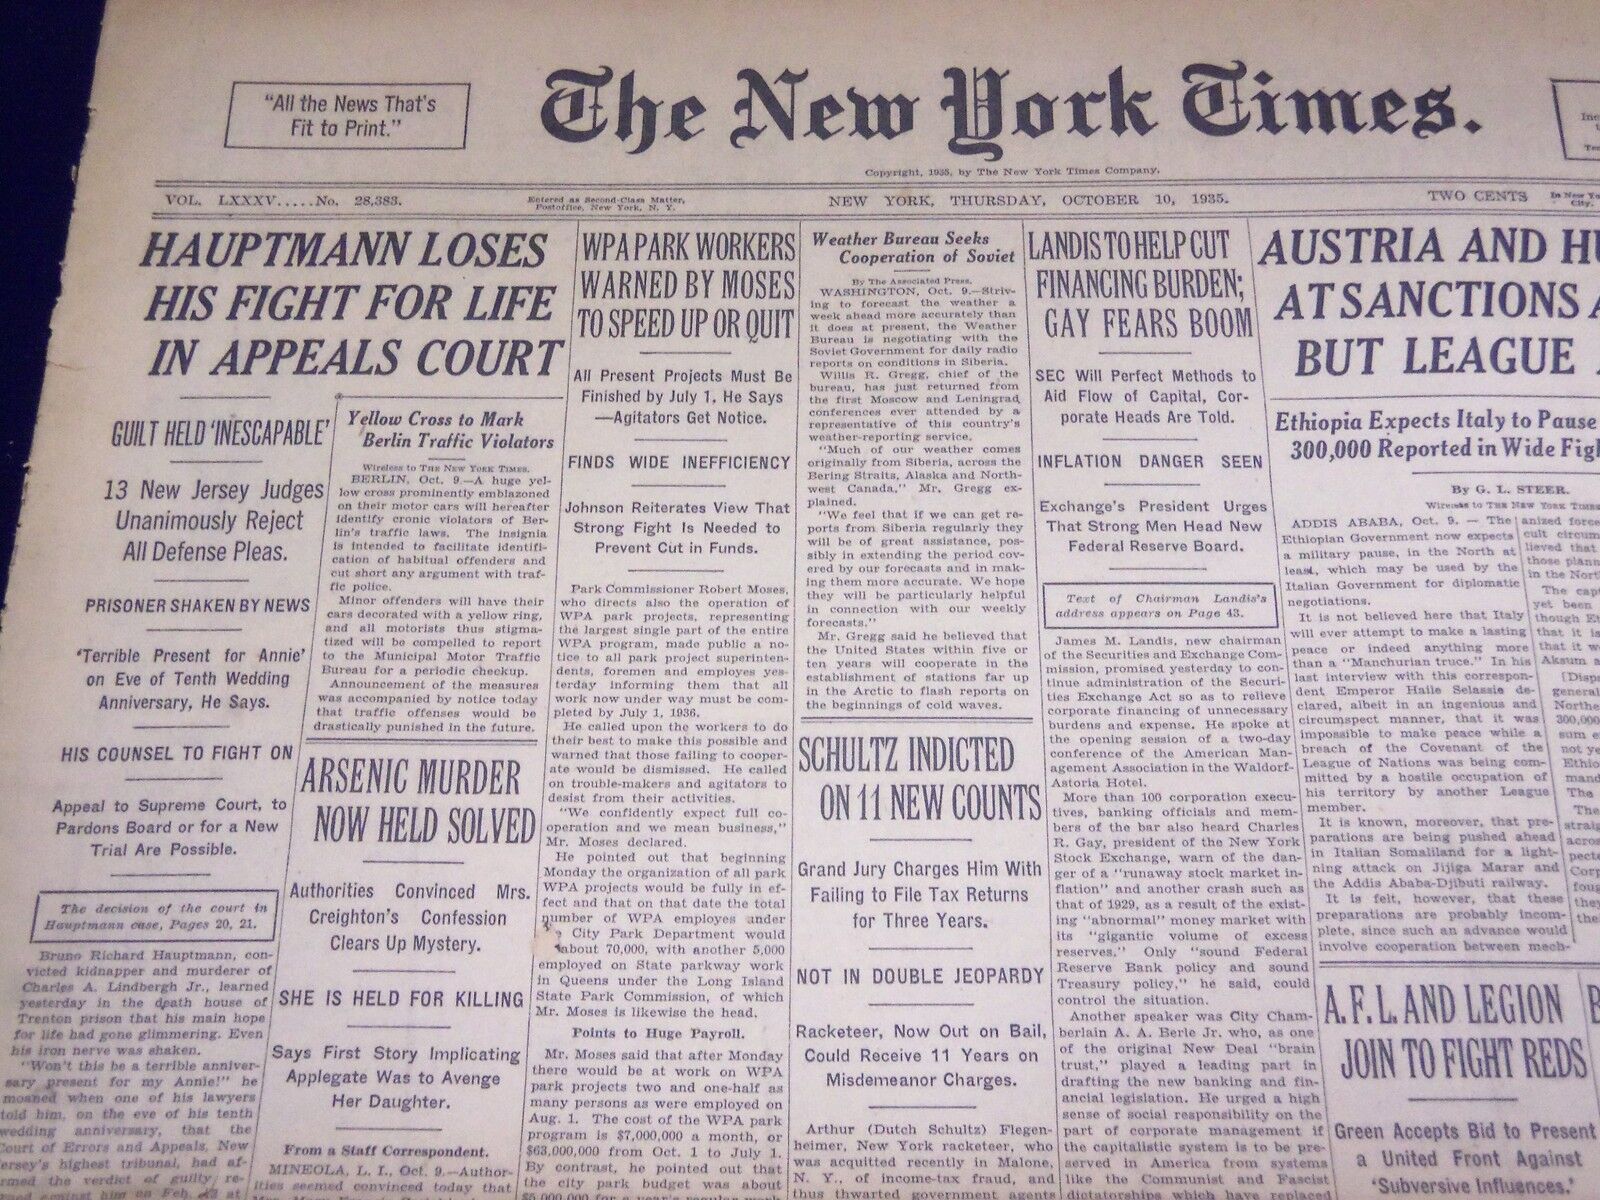 1935 OCT 10 NEW YORK TIMES - HAUPTMANN LOSES FIGHT IN APPEALS COURT - NT 4306